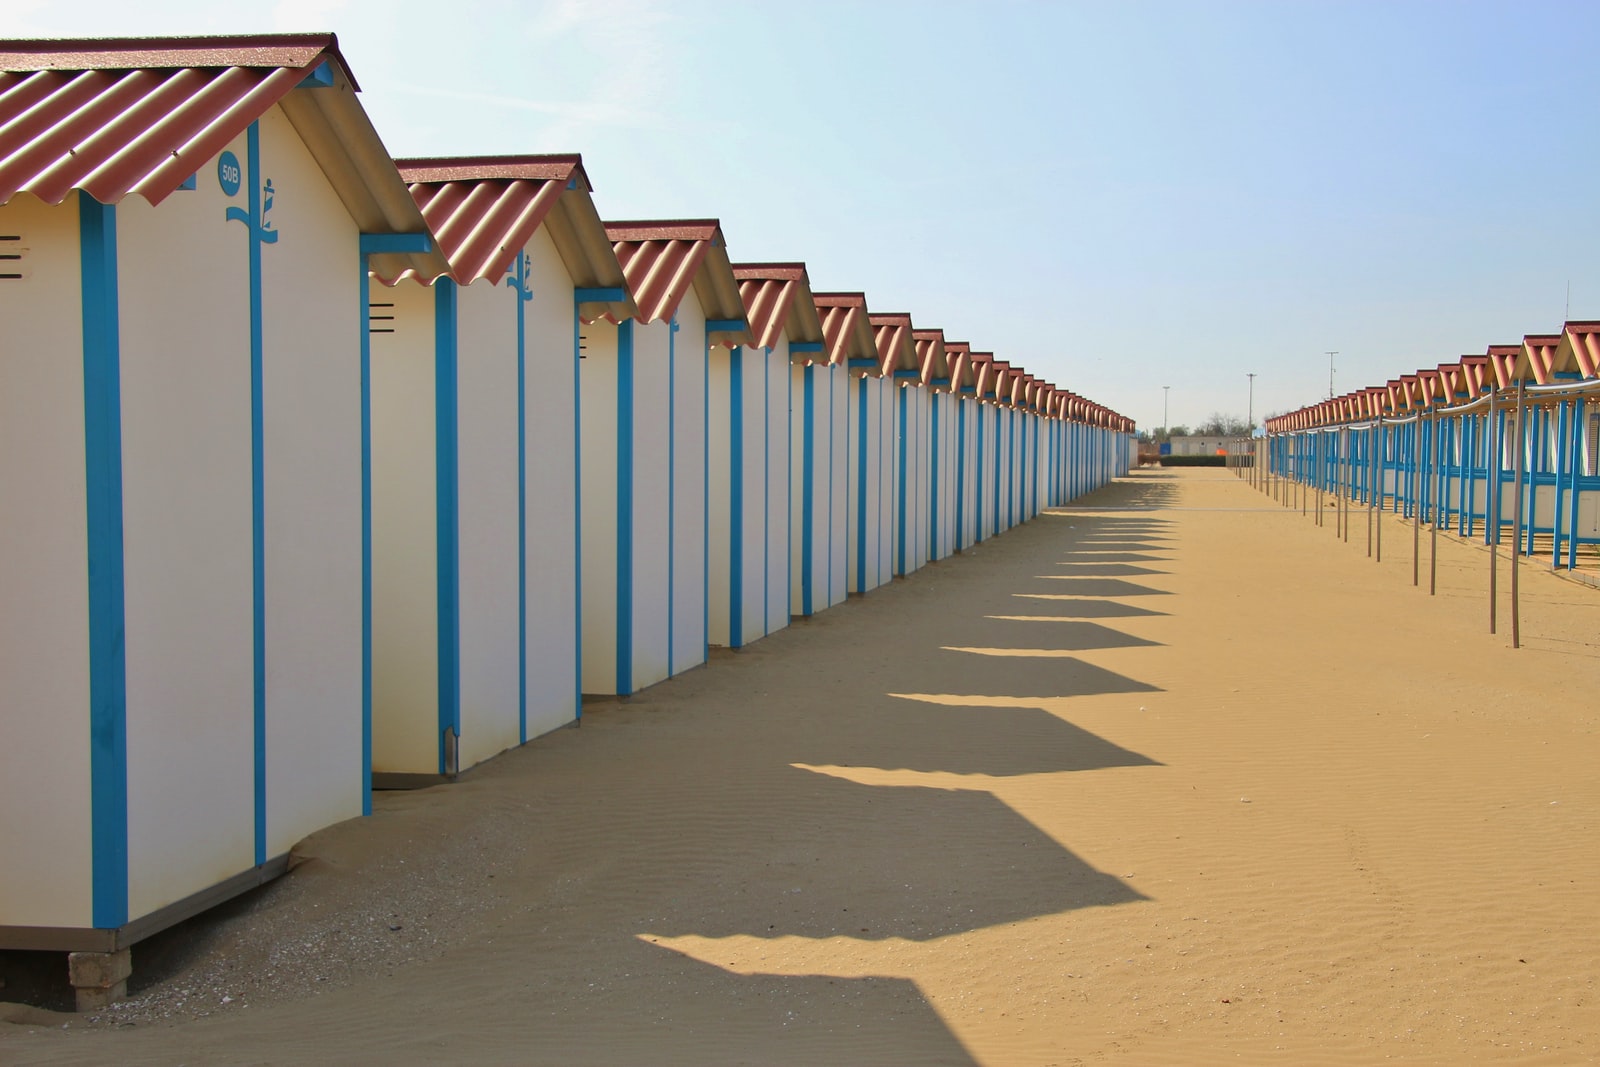 Closed beach huts on the famous Lido beach in Venice